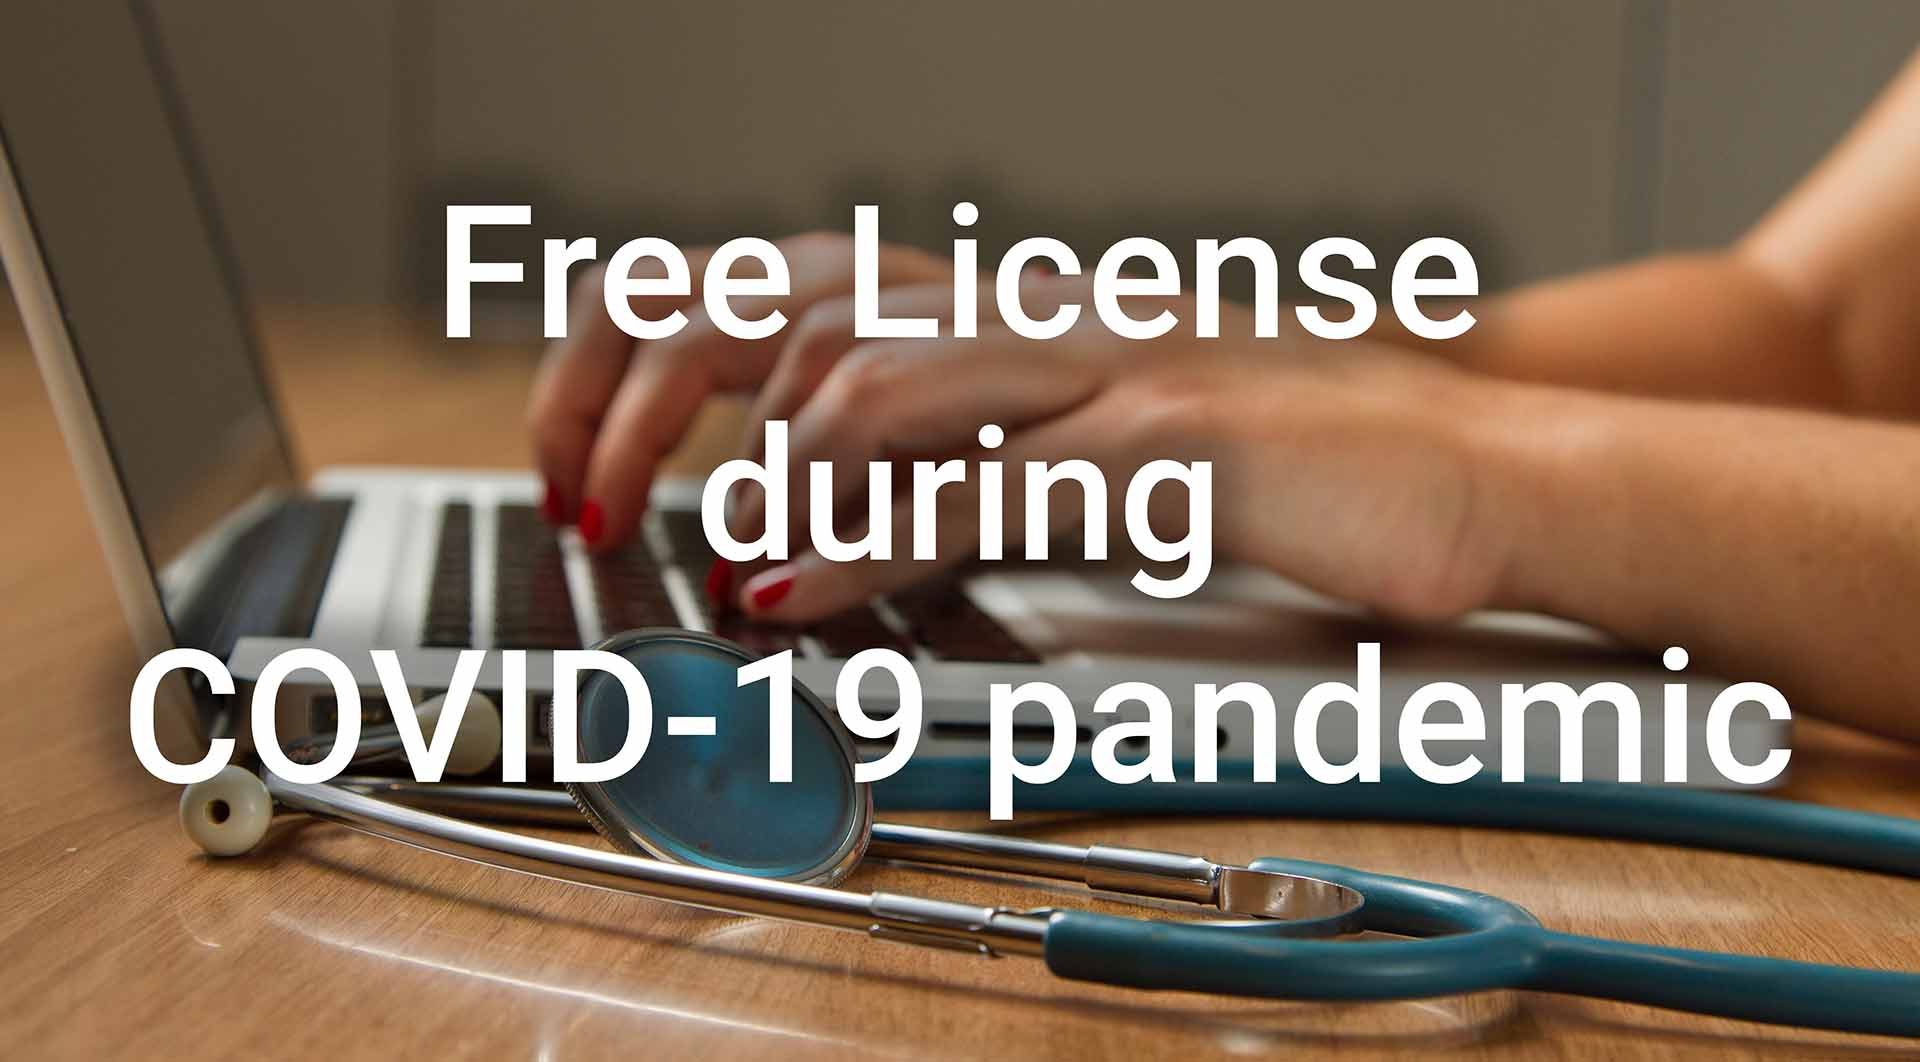 approval-studio-free-licenses-during-pandemic